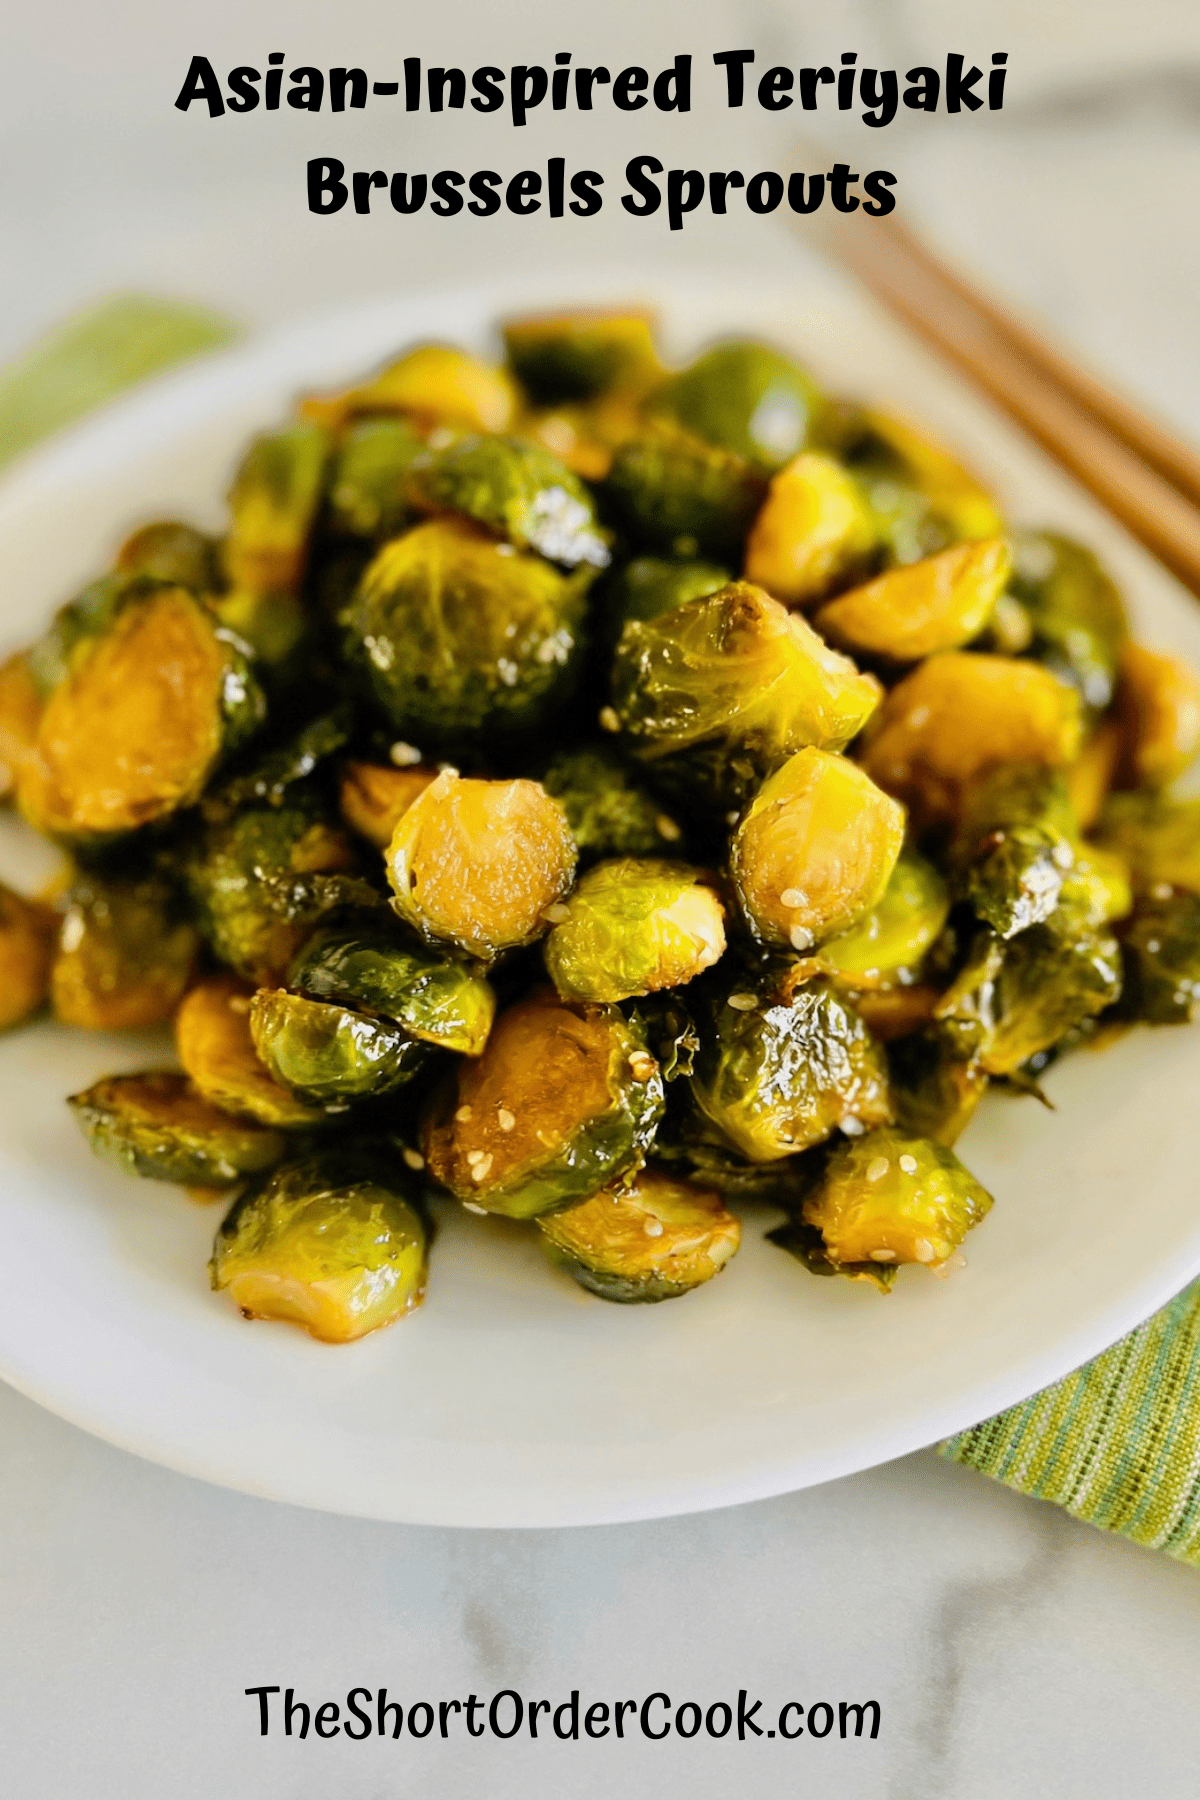 Plate piled high with Brussels sprouts in teriyaki sauce and sesame seeds.